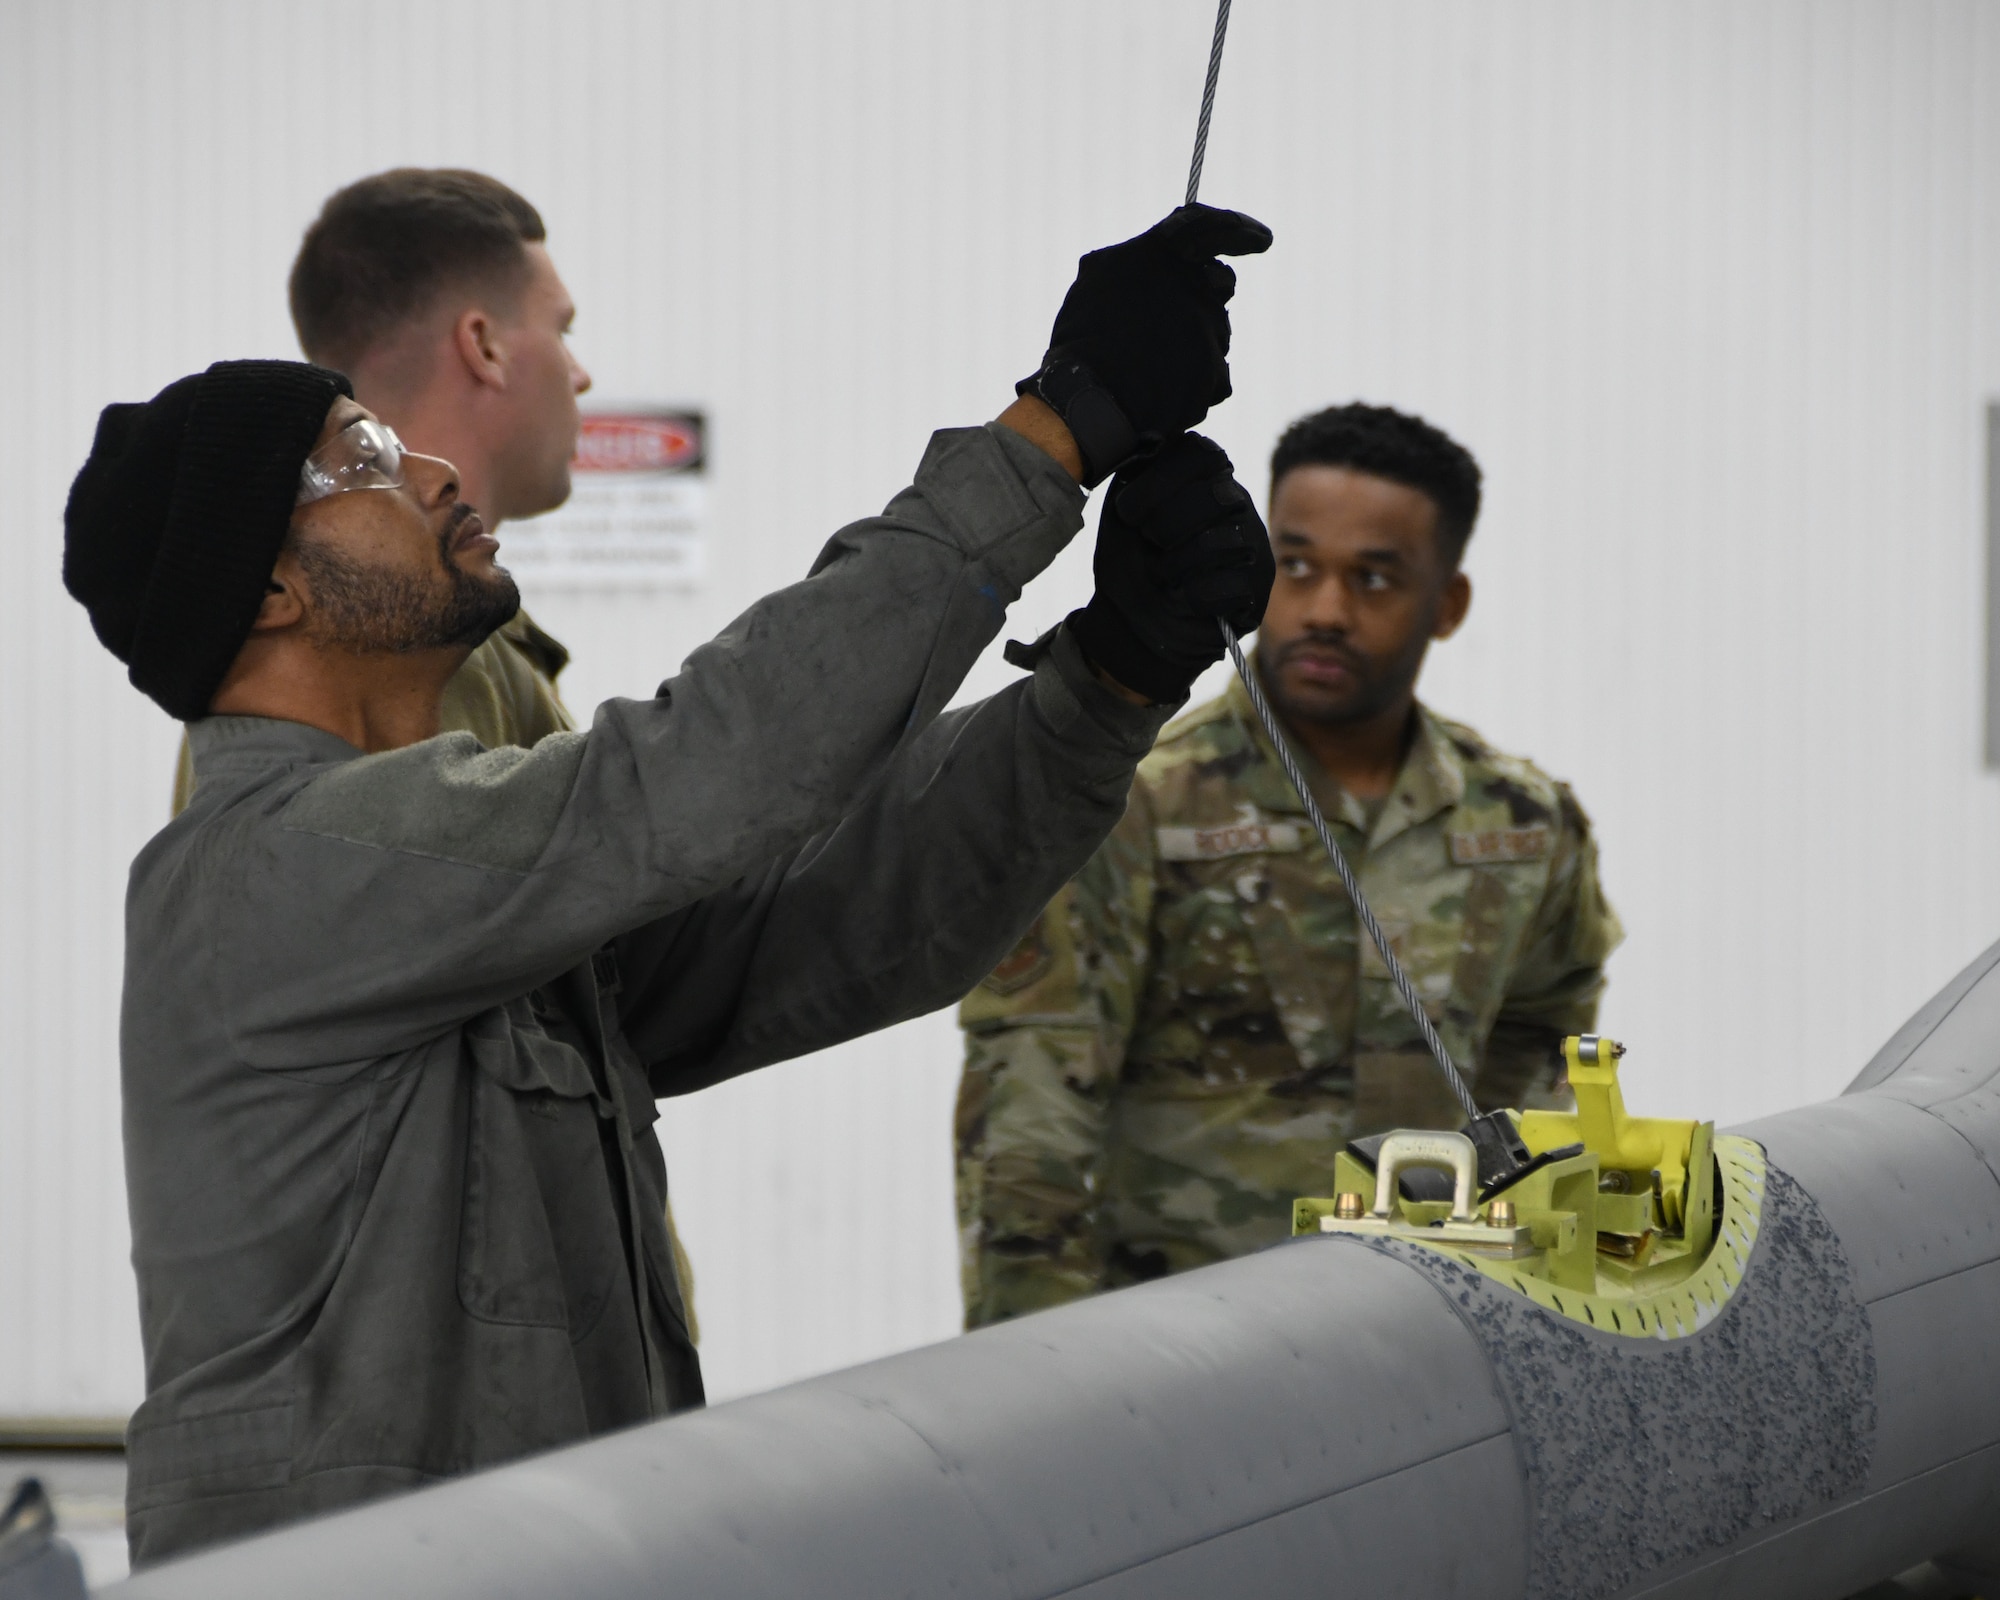 Maintainers with the 459th Maintenance Squadron install a new boom in one of its KC-135 Stratotanker aircraft. The members of the squadron continuously maintain, update and upgrade the aircraft and its features to ensure this weapons system is always ready to answer the Nation's call.